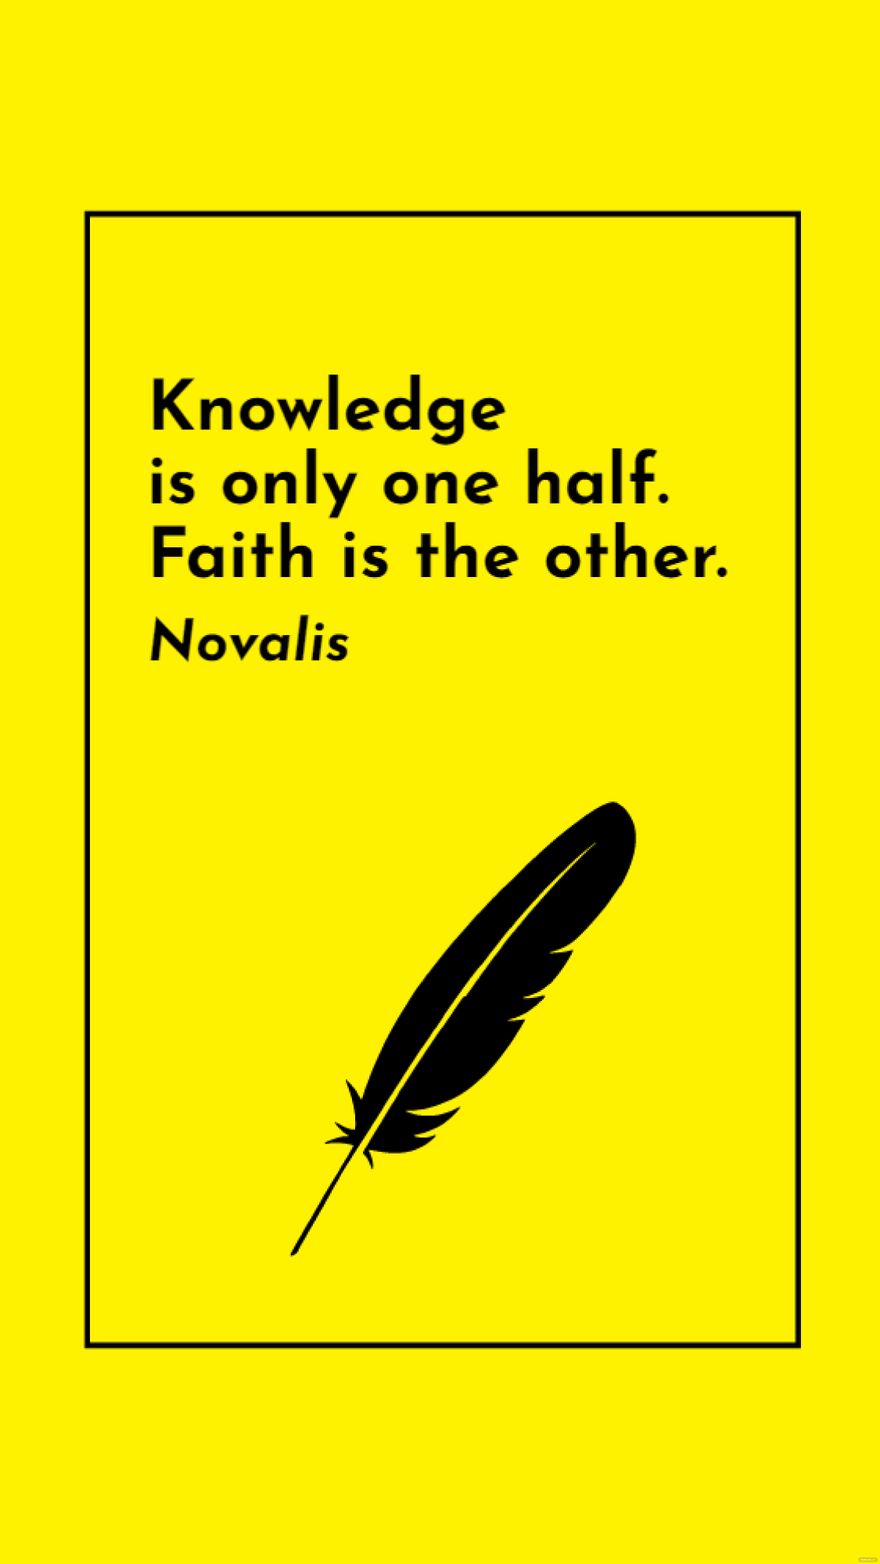 Novalis - Knowledge is only one half. Faith is the other. in JPG